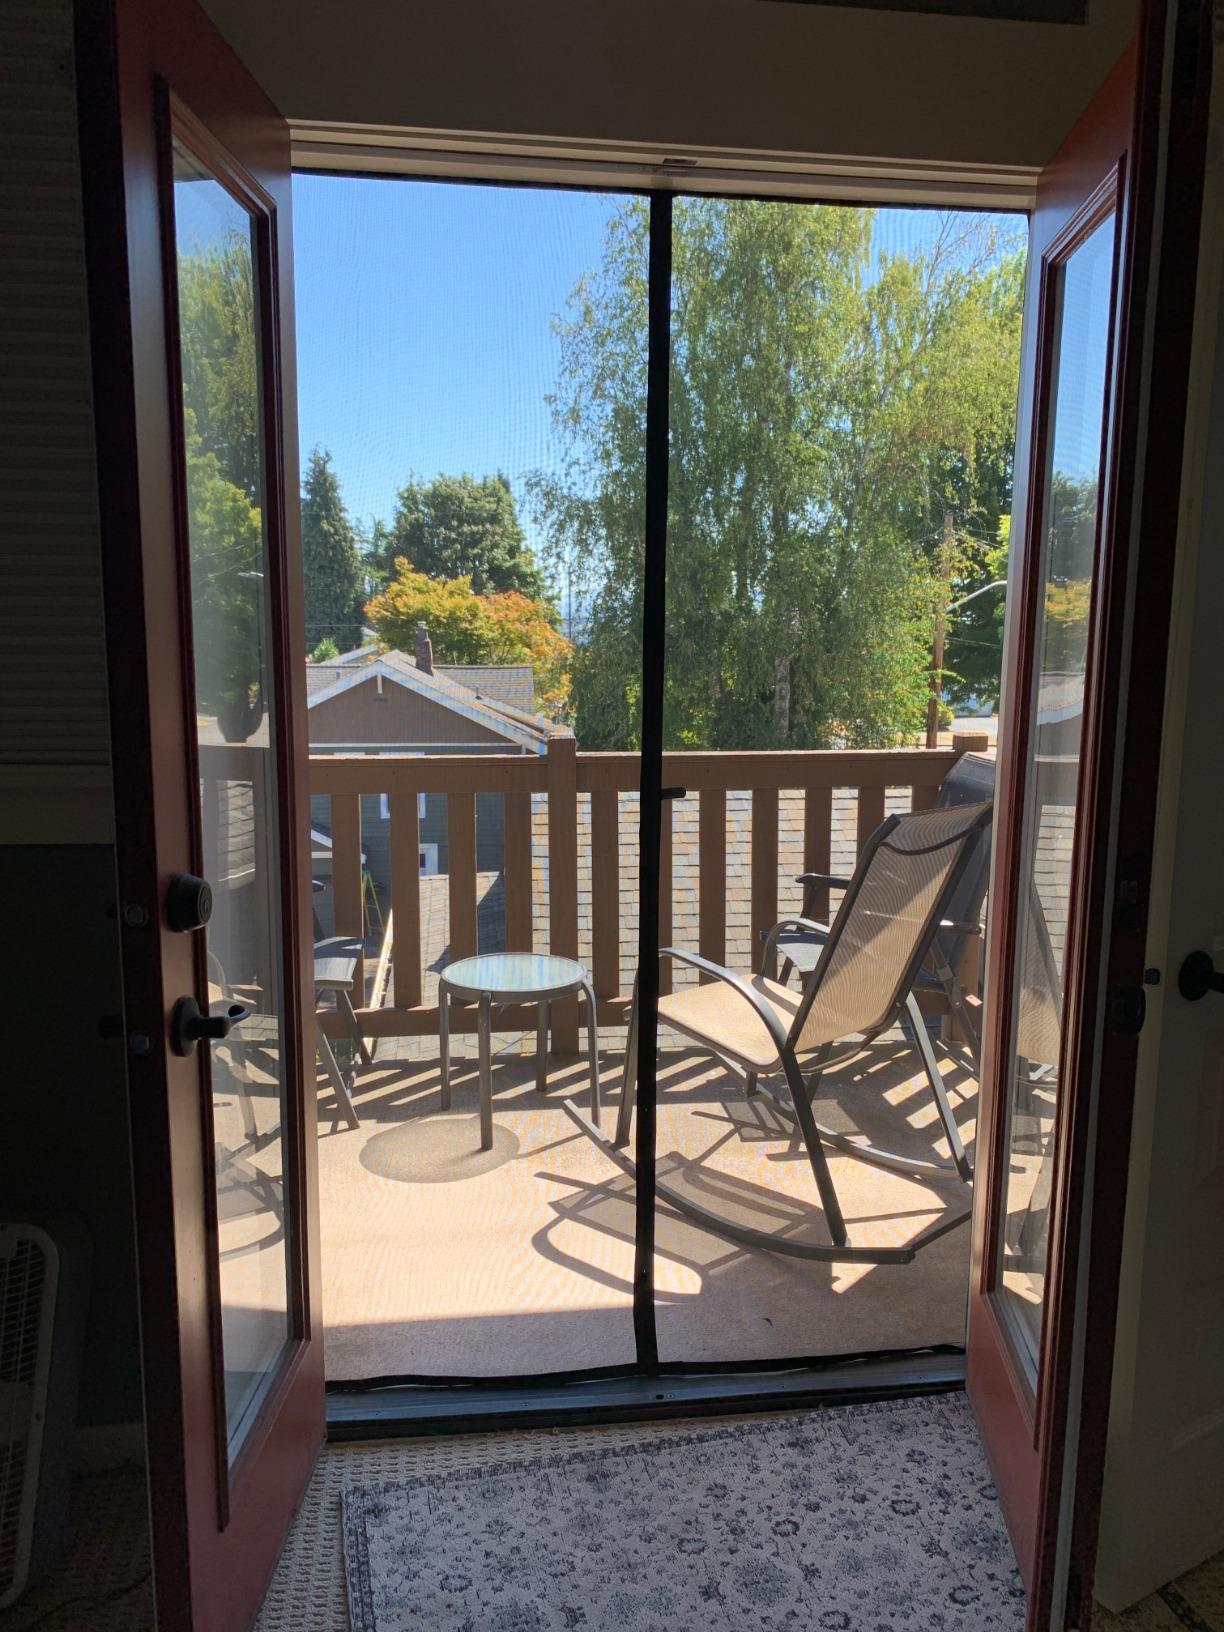 Magnetic Mesh Insect Screen Door - Your Ultimate Guard To Insects This Summer! photo review